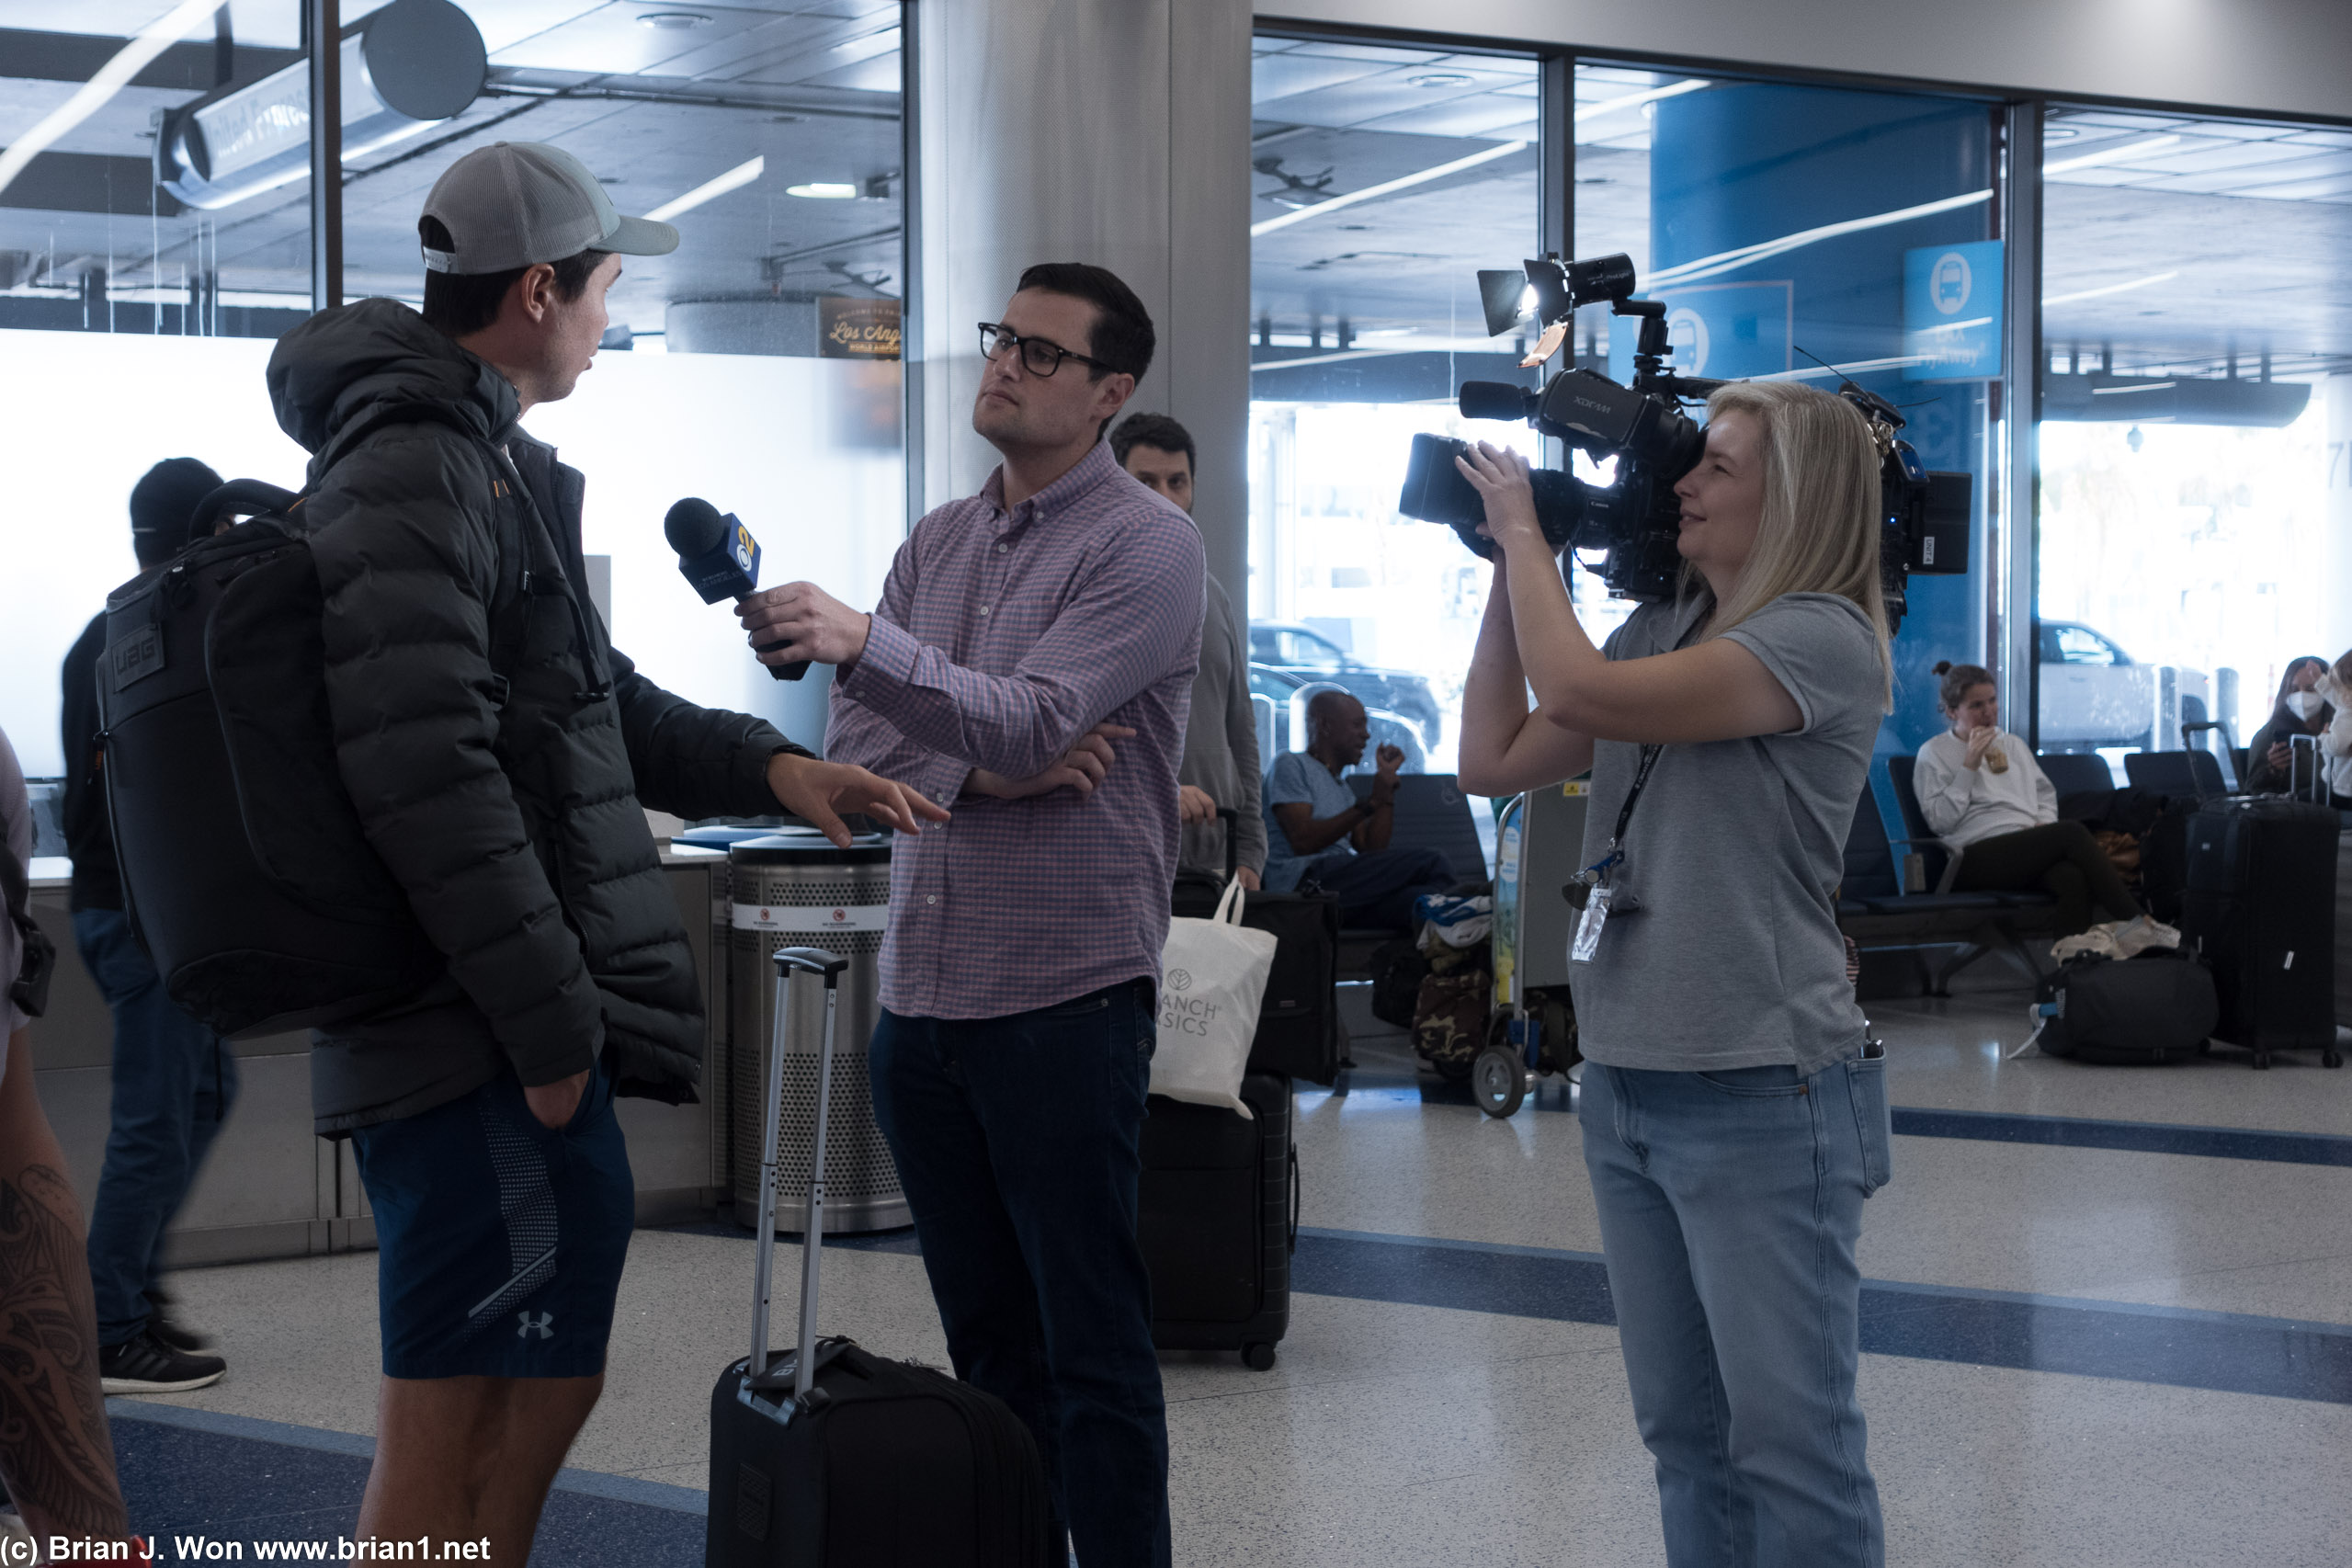 CBS 2 News interviewing passengers affected/delayed by the carbon dioxide accident this morning.